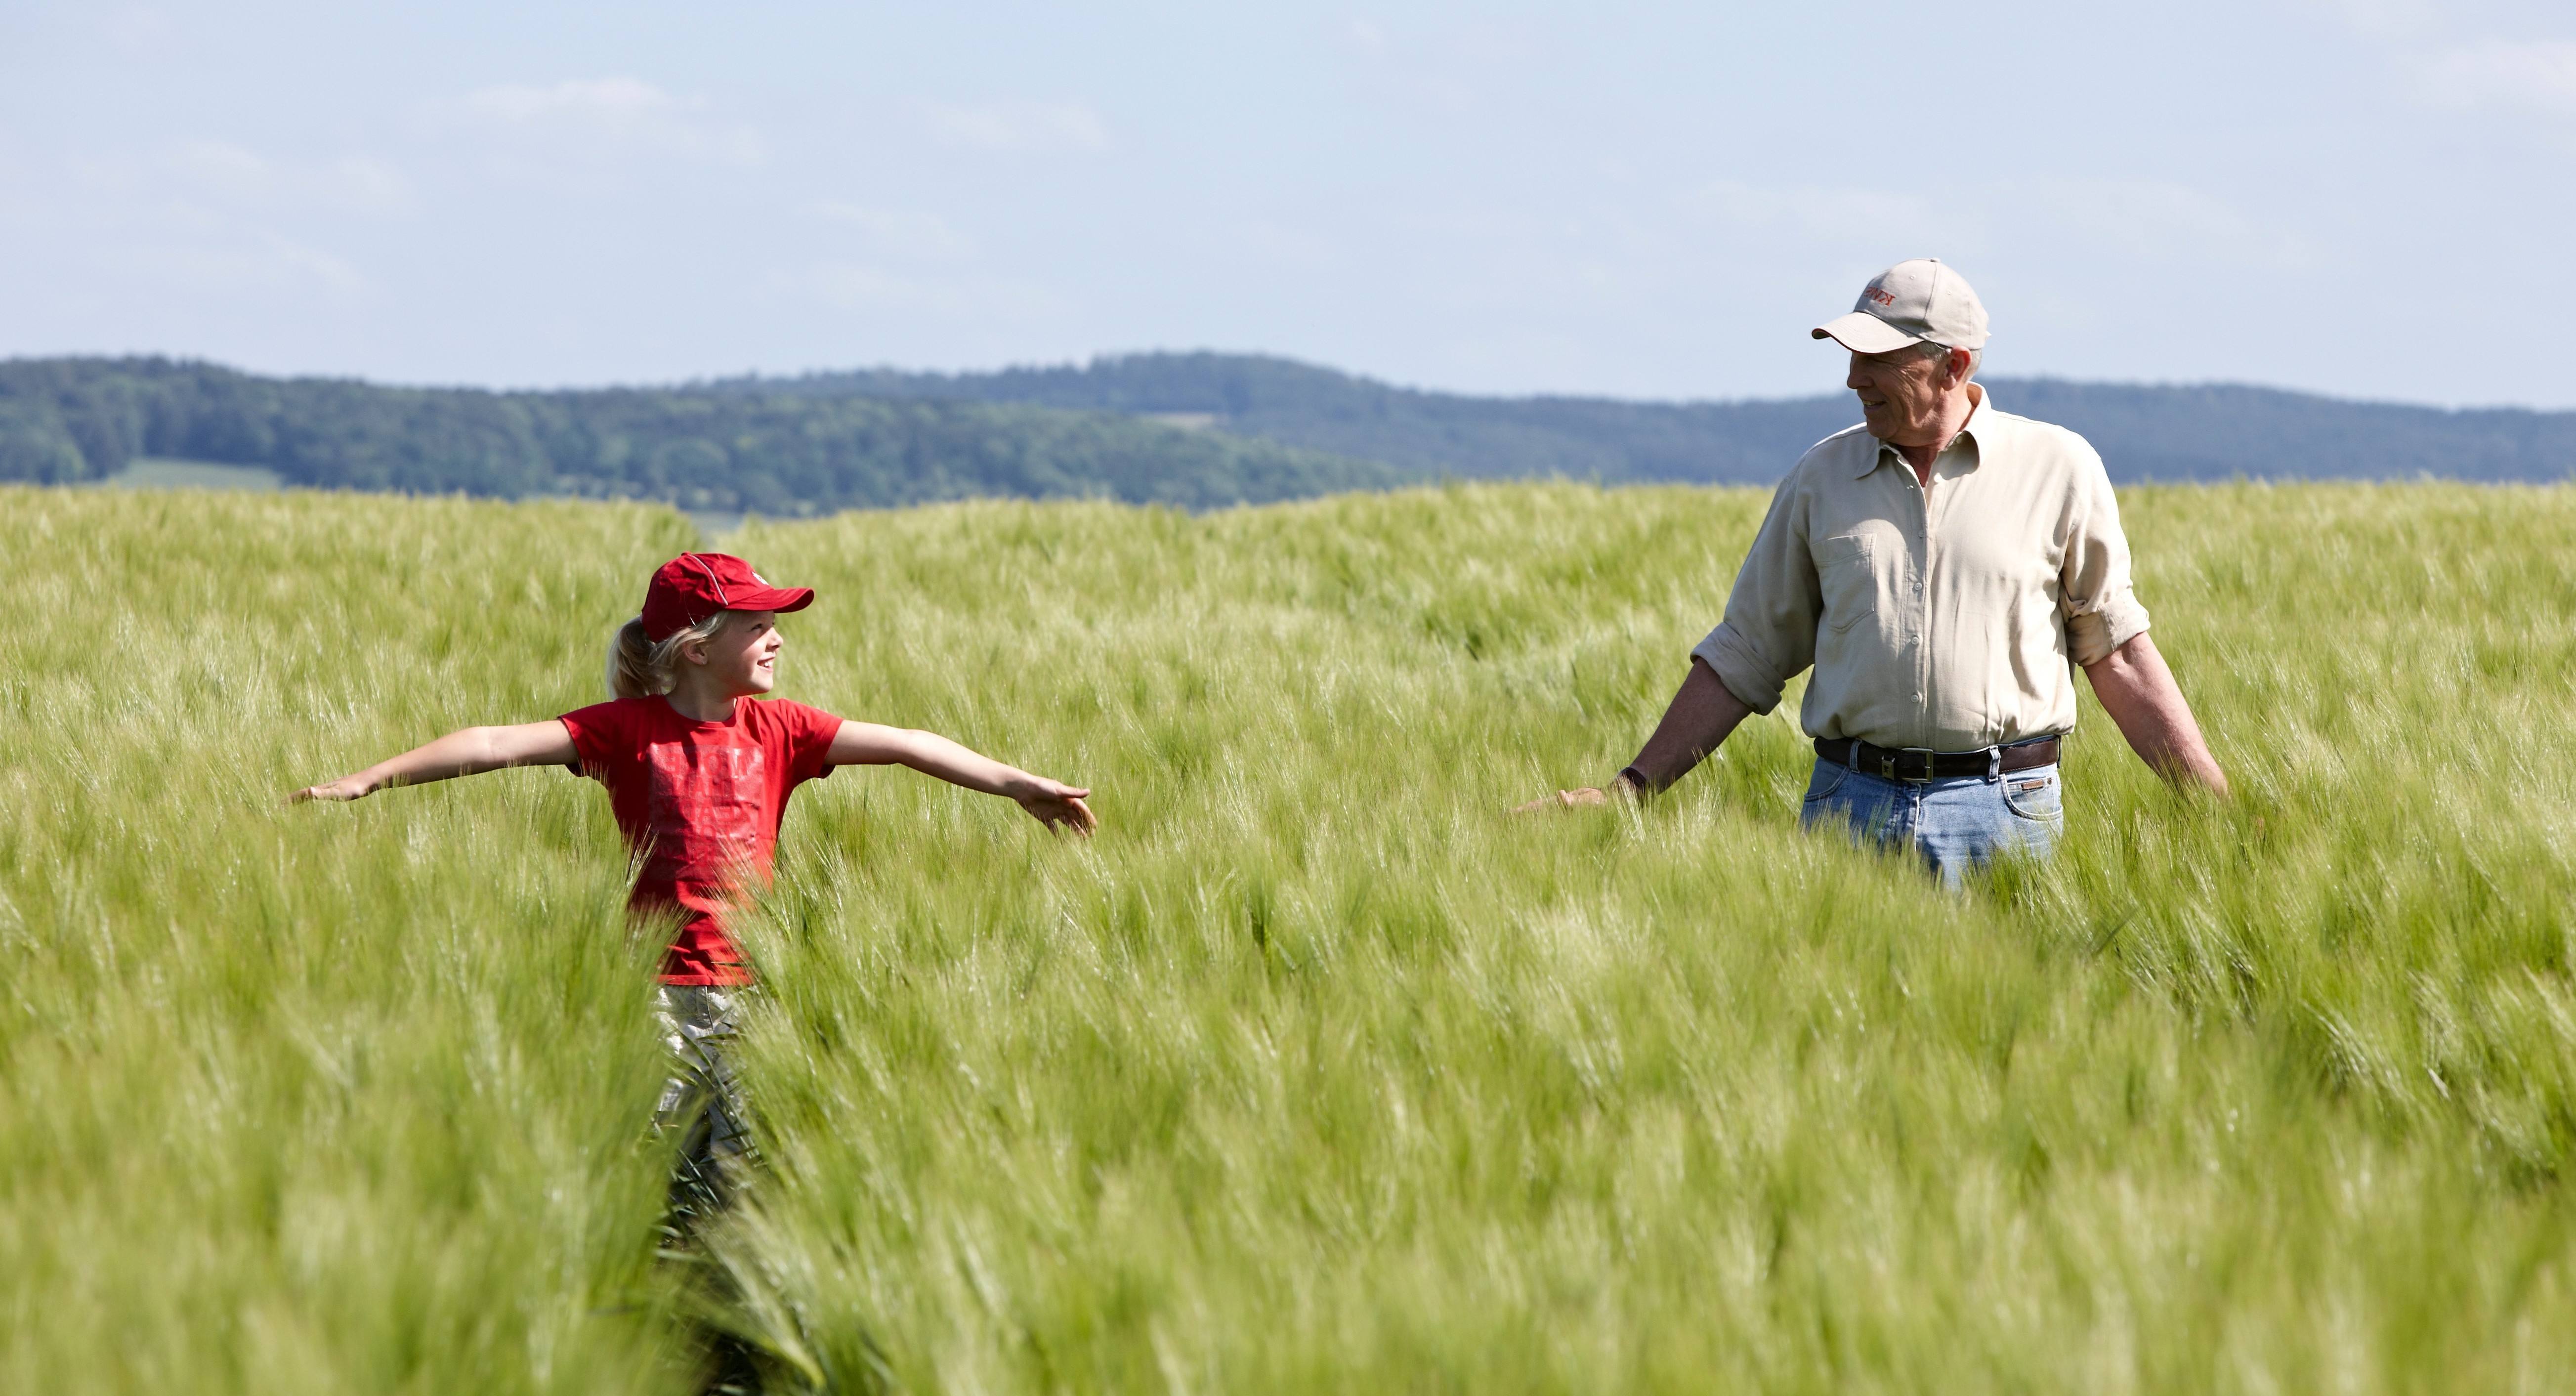 Granddaughter and grandfather in the field